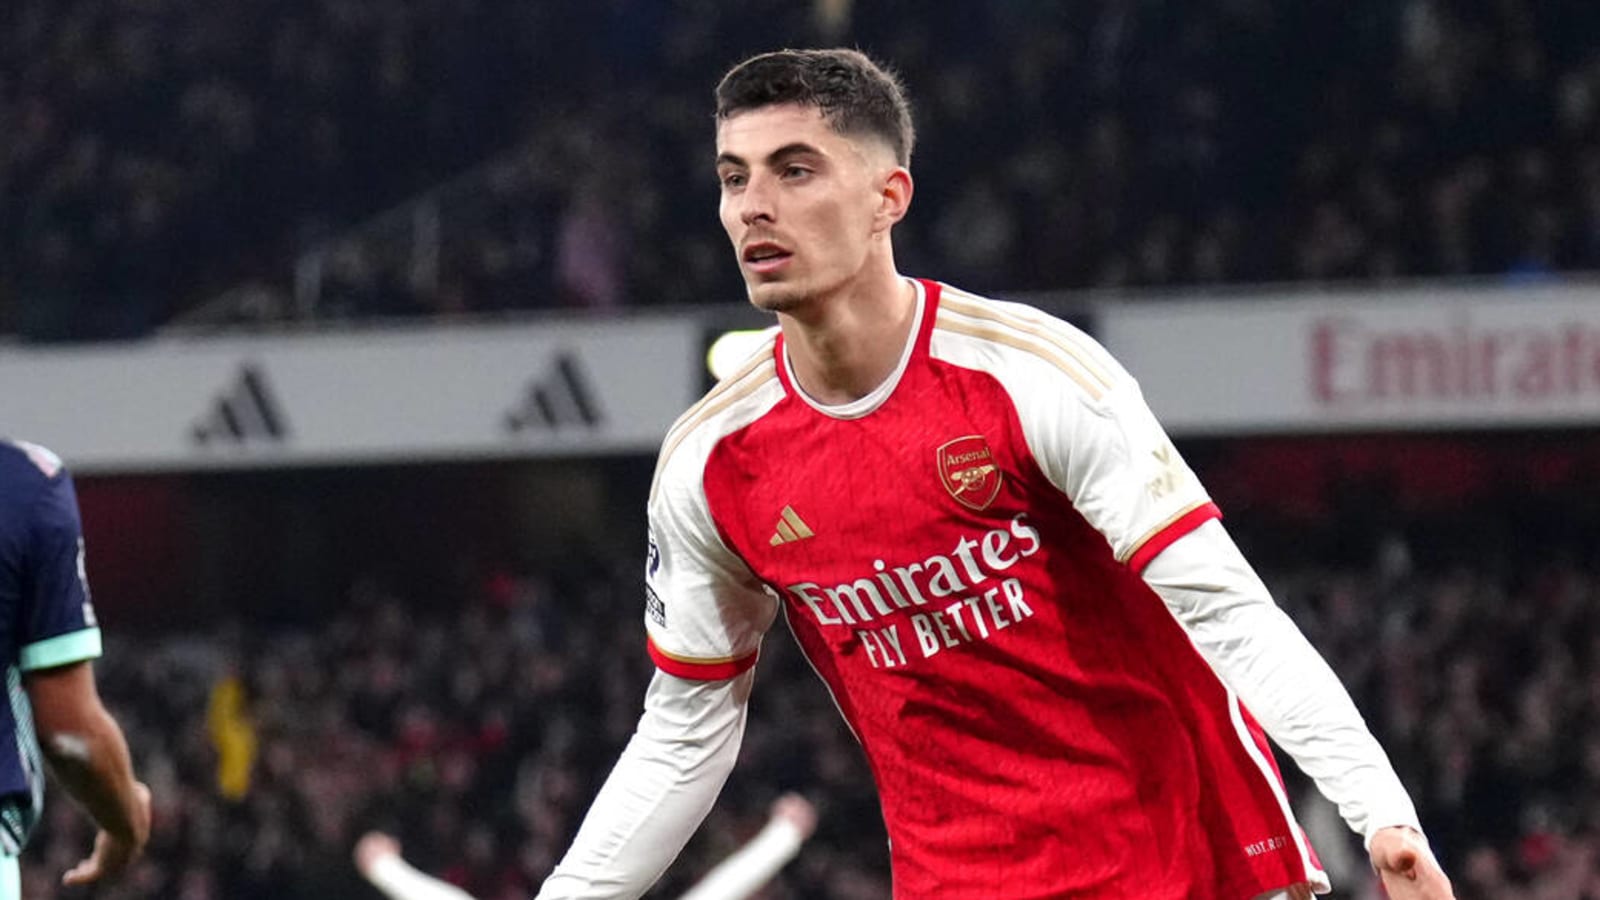 Watch: Kai Havertz wins it for Arsenal with a fine header from another Ben White assist